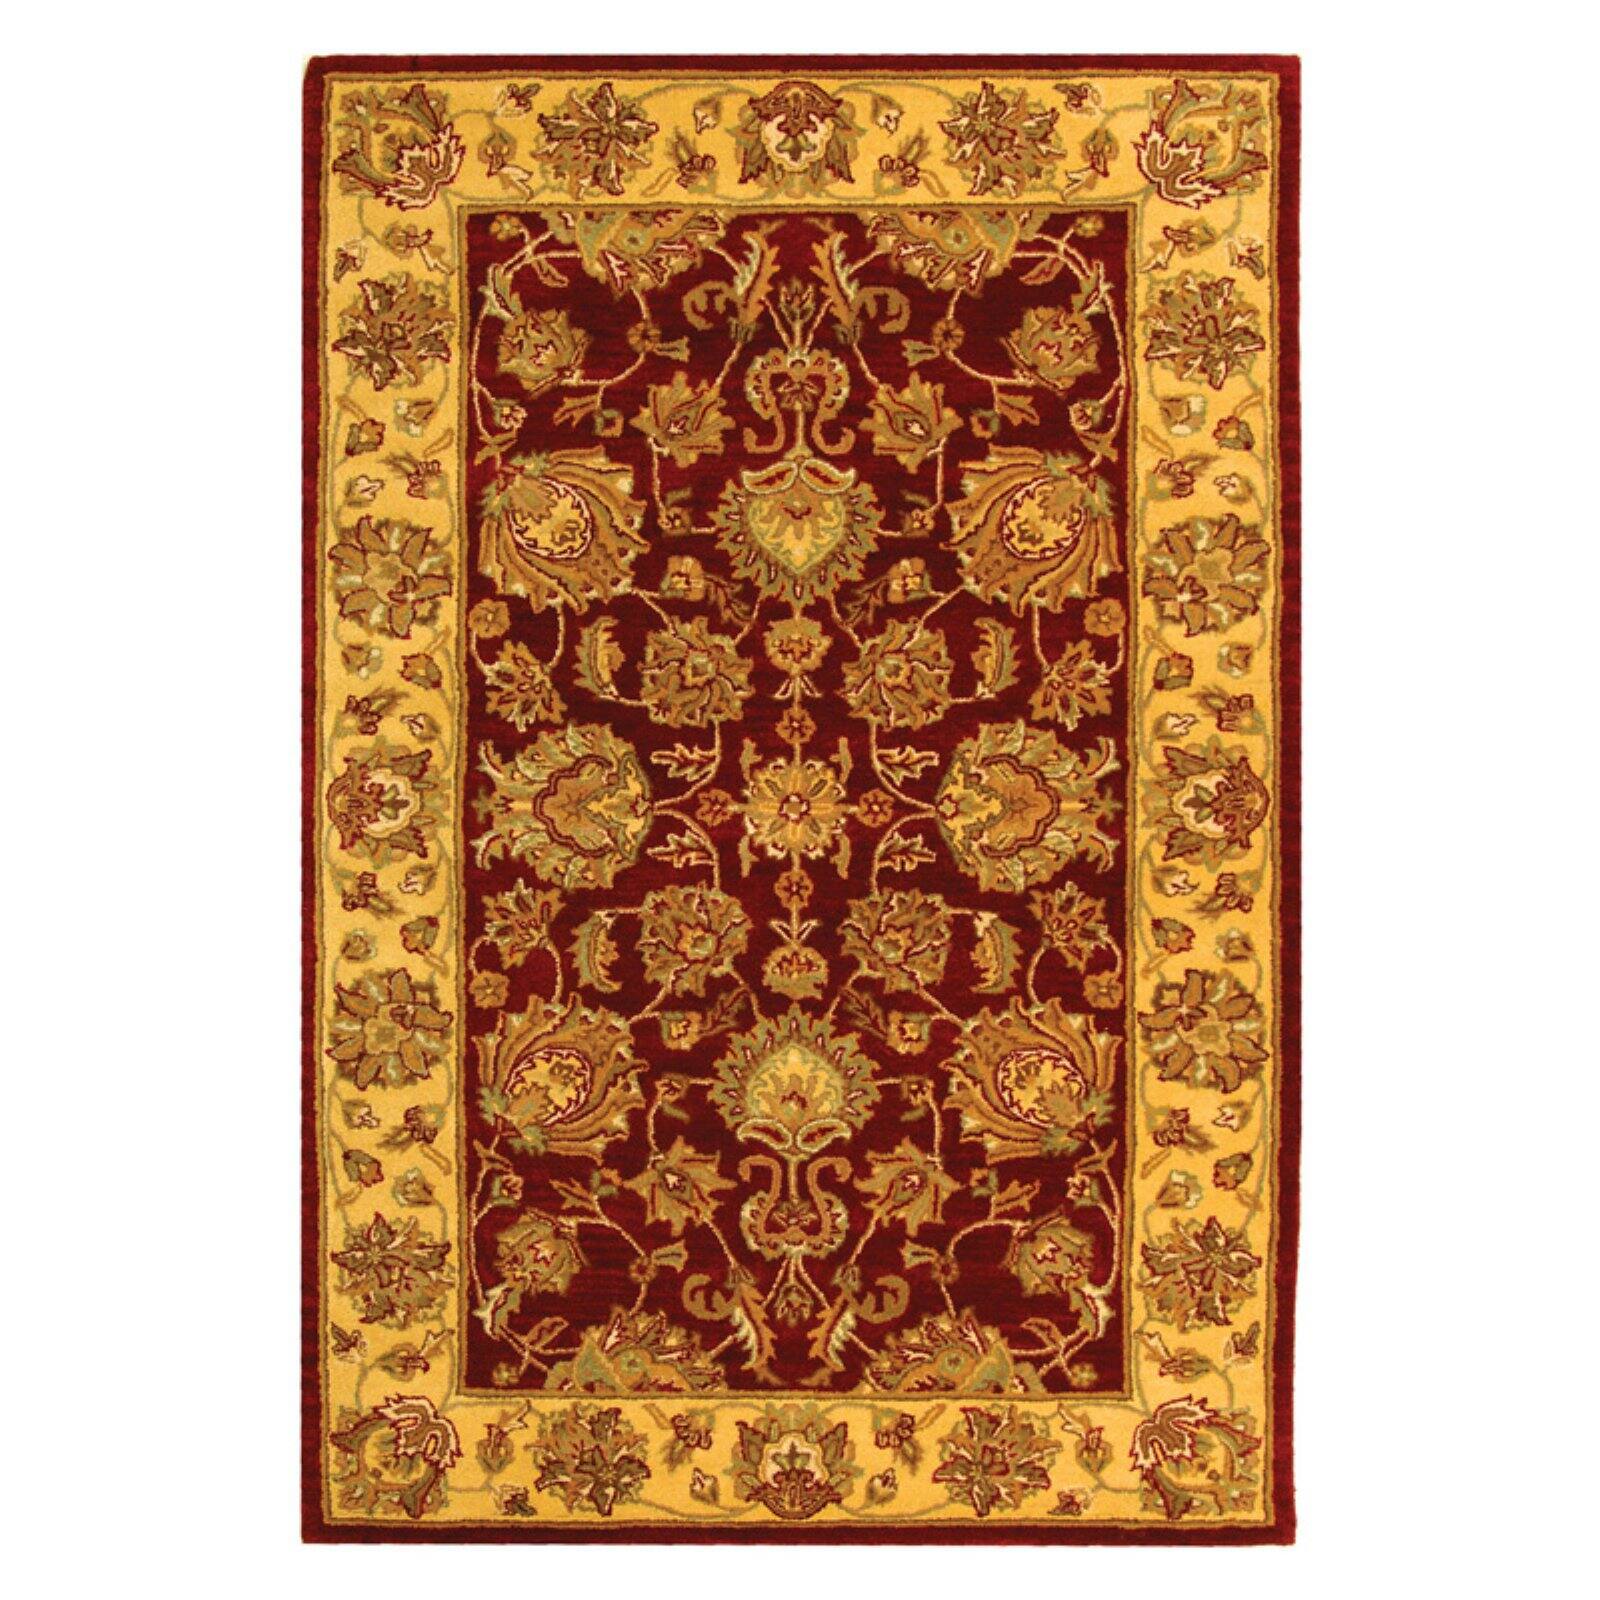 SAFAVIEH Heritage Regis Traditional Wool Area Rug, Red/Gold, 6' x 9' - image 4 of 9